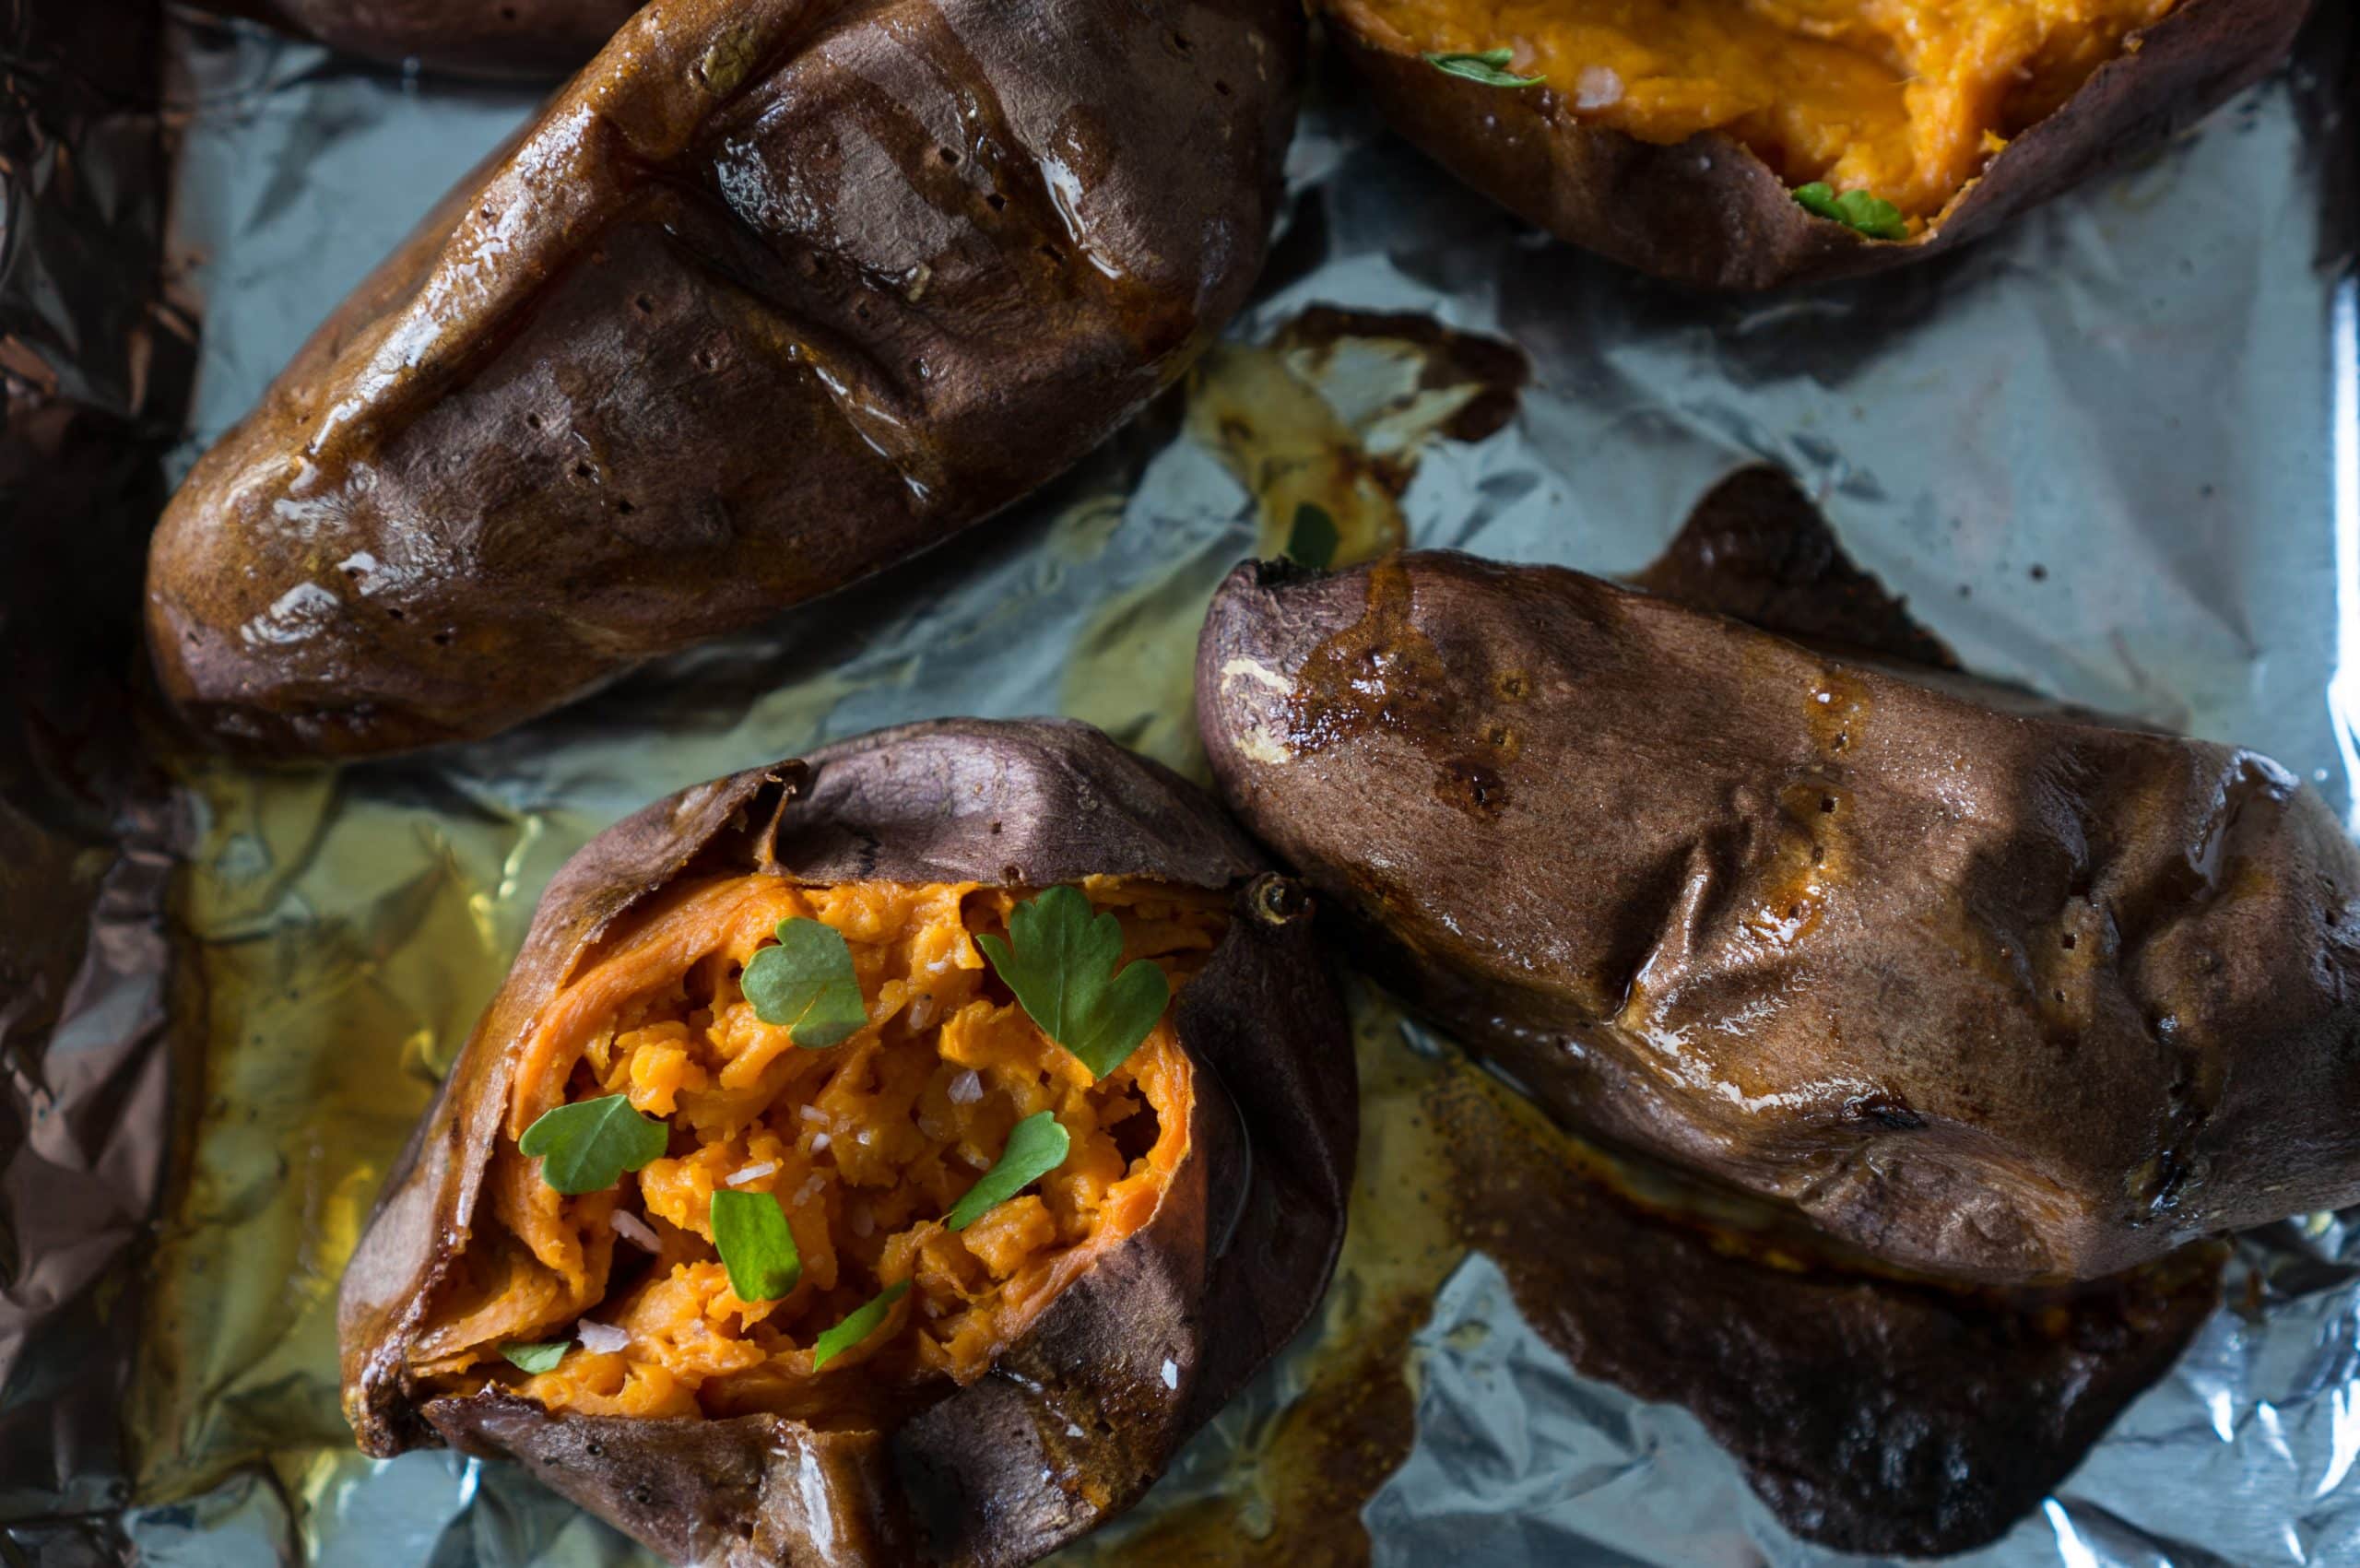 Slow Roasted Sticky Sweet Potatoes - We love this simple, vegan recipe for Slow Roasted Sticky Sweet Potatoes! Just 2 ingredients (olive oil + sweet potatoes) & a hot oven are all you need for perfectly caramelized sweet potatoes every time | freeyourfork.com